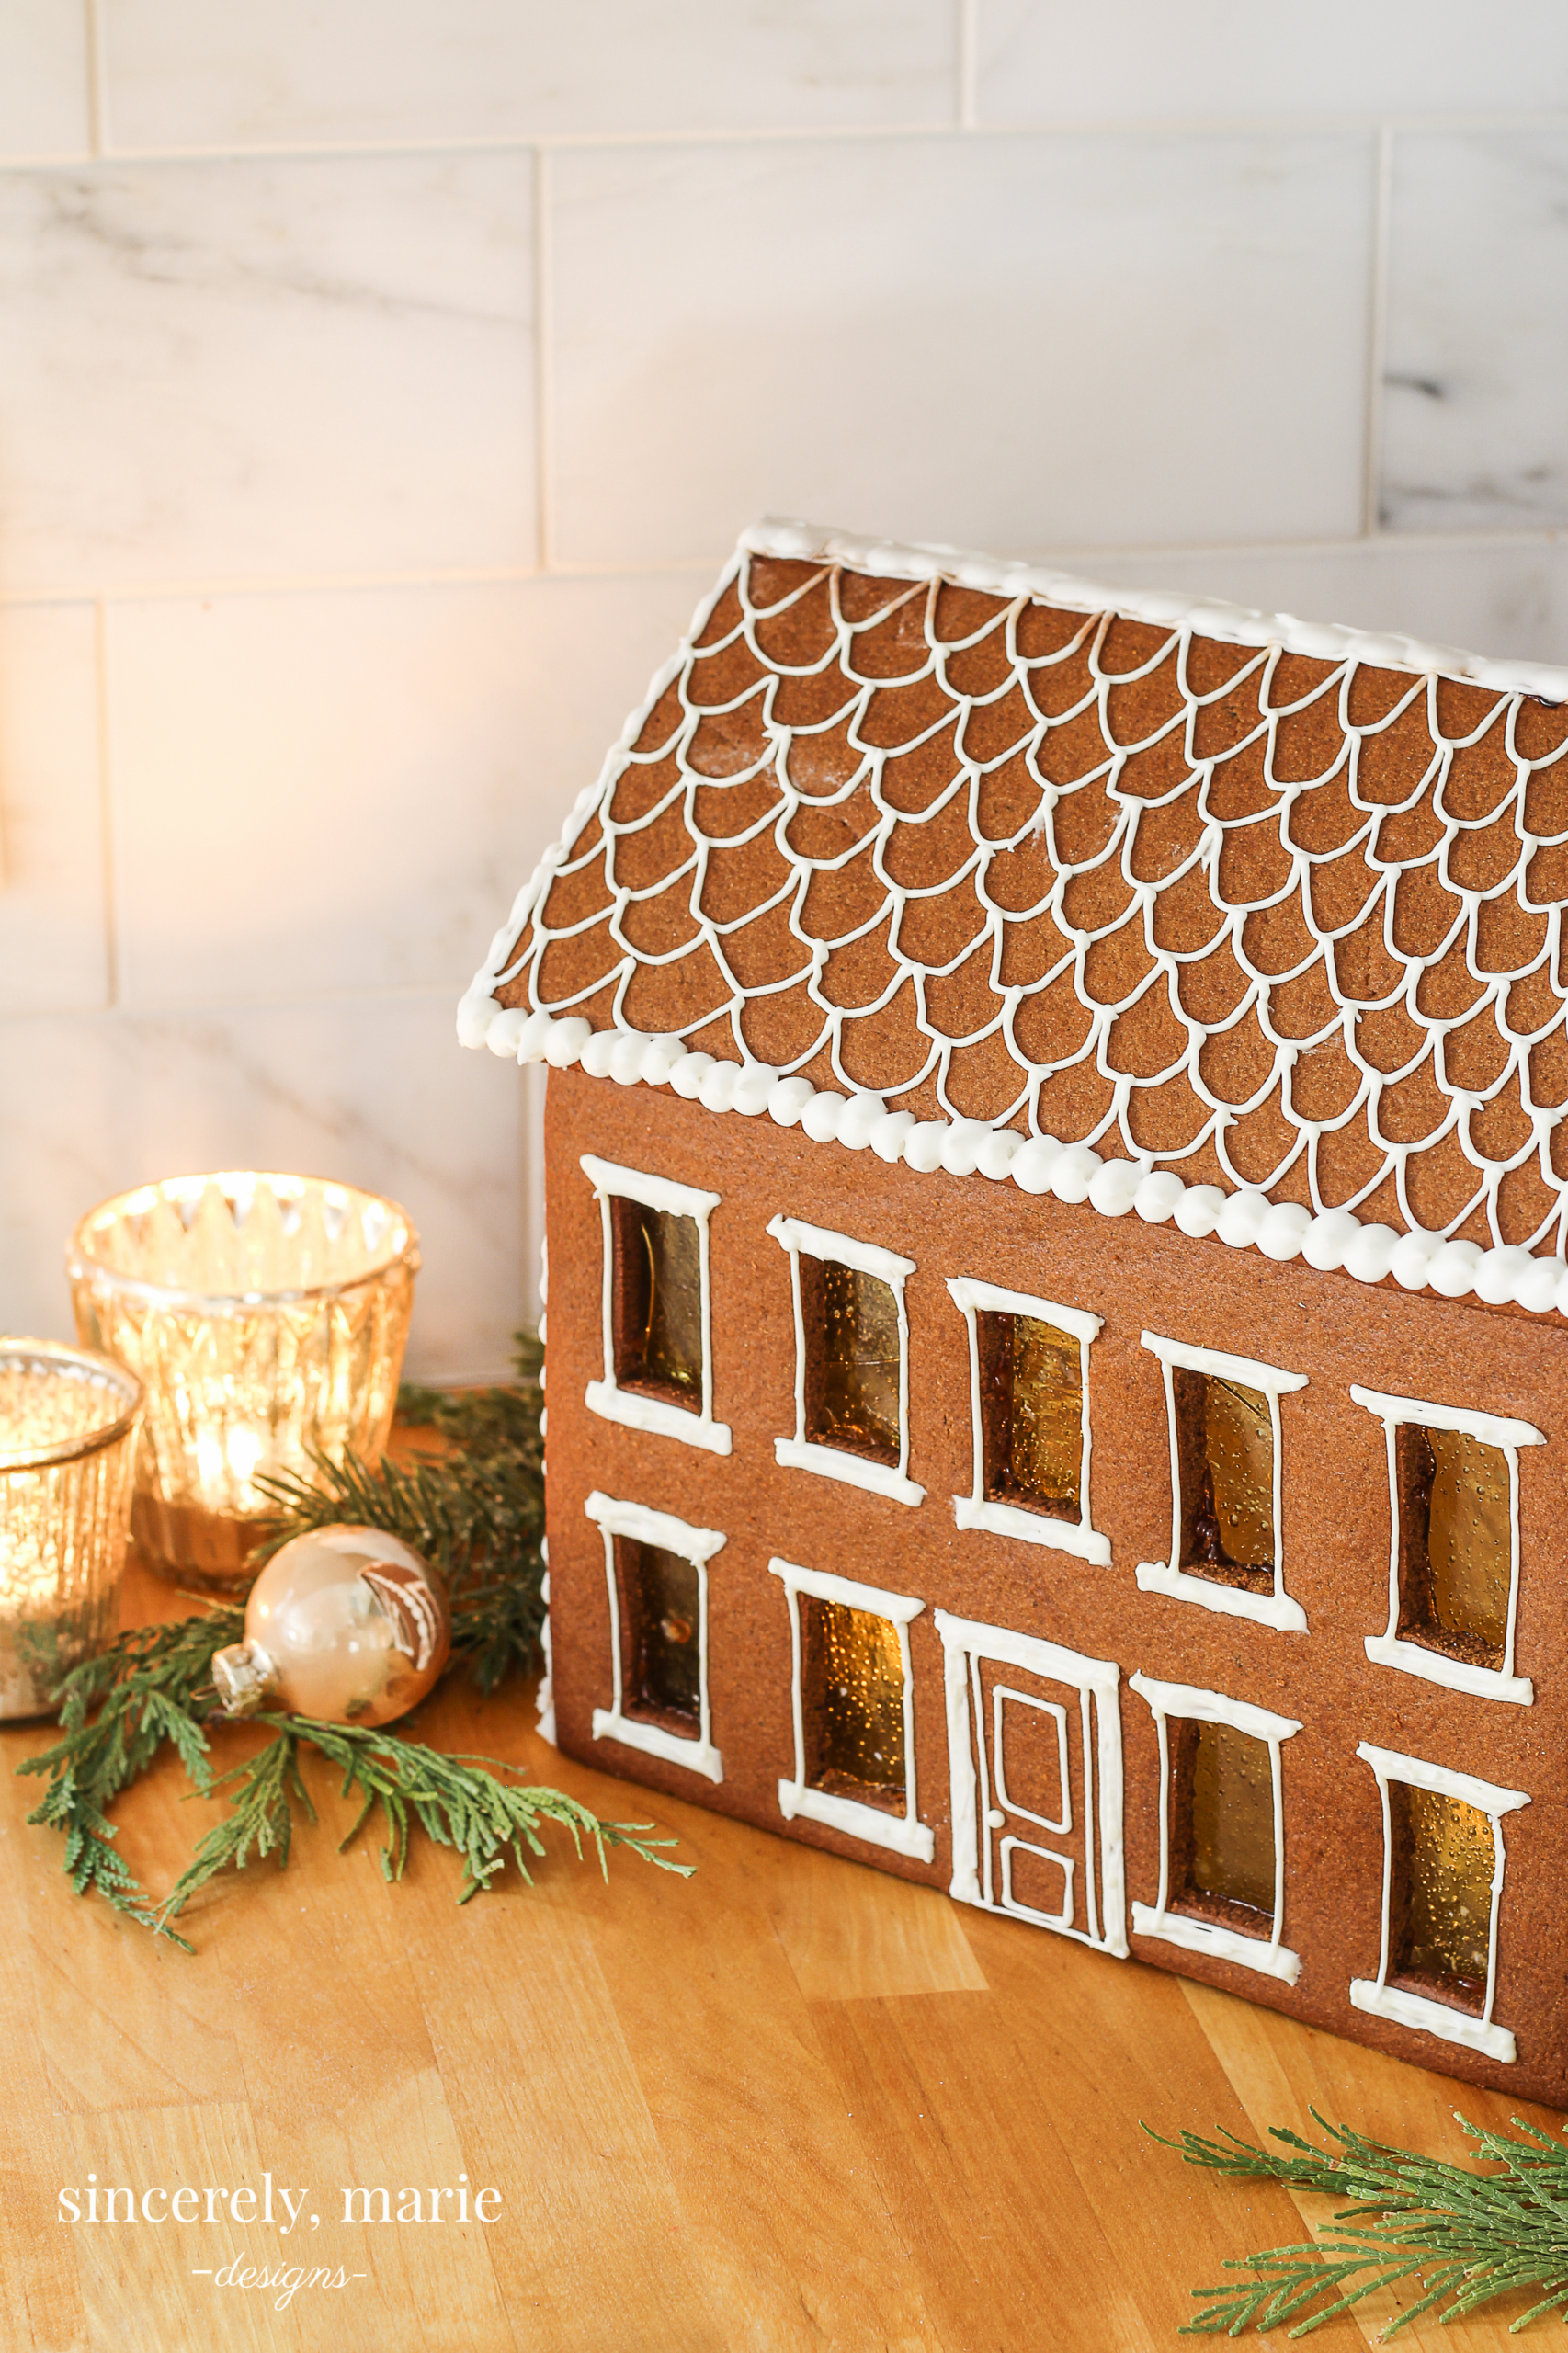 Festive Gingerbread House Cakes - Finding Silver Pennies